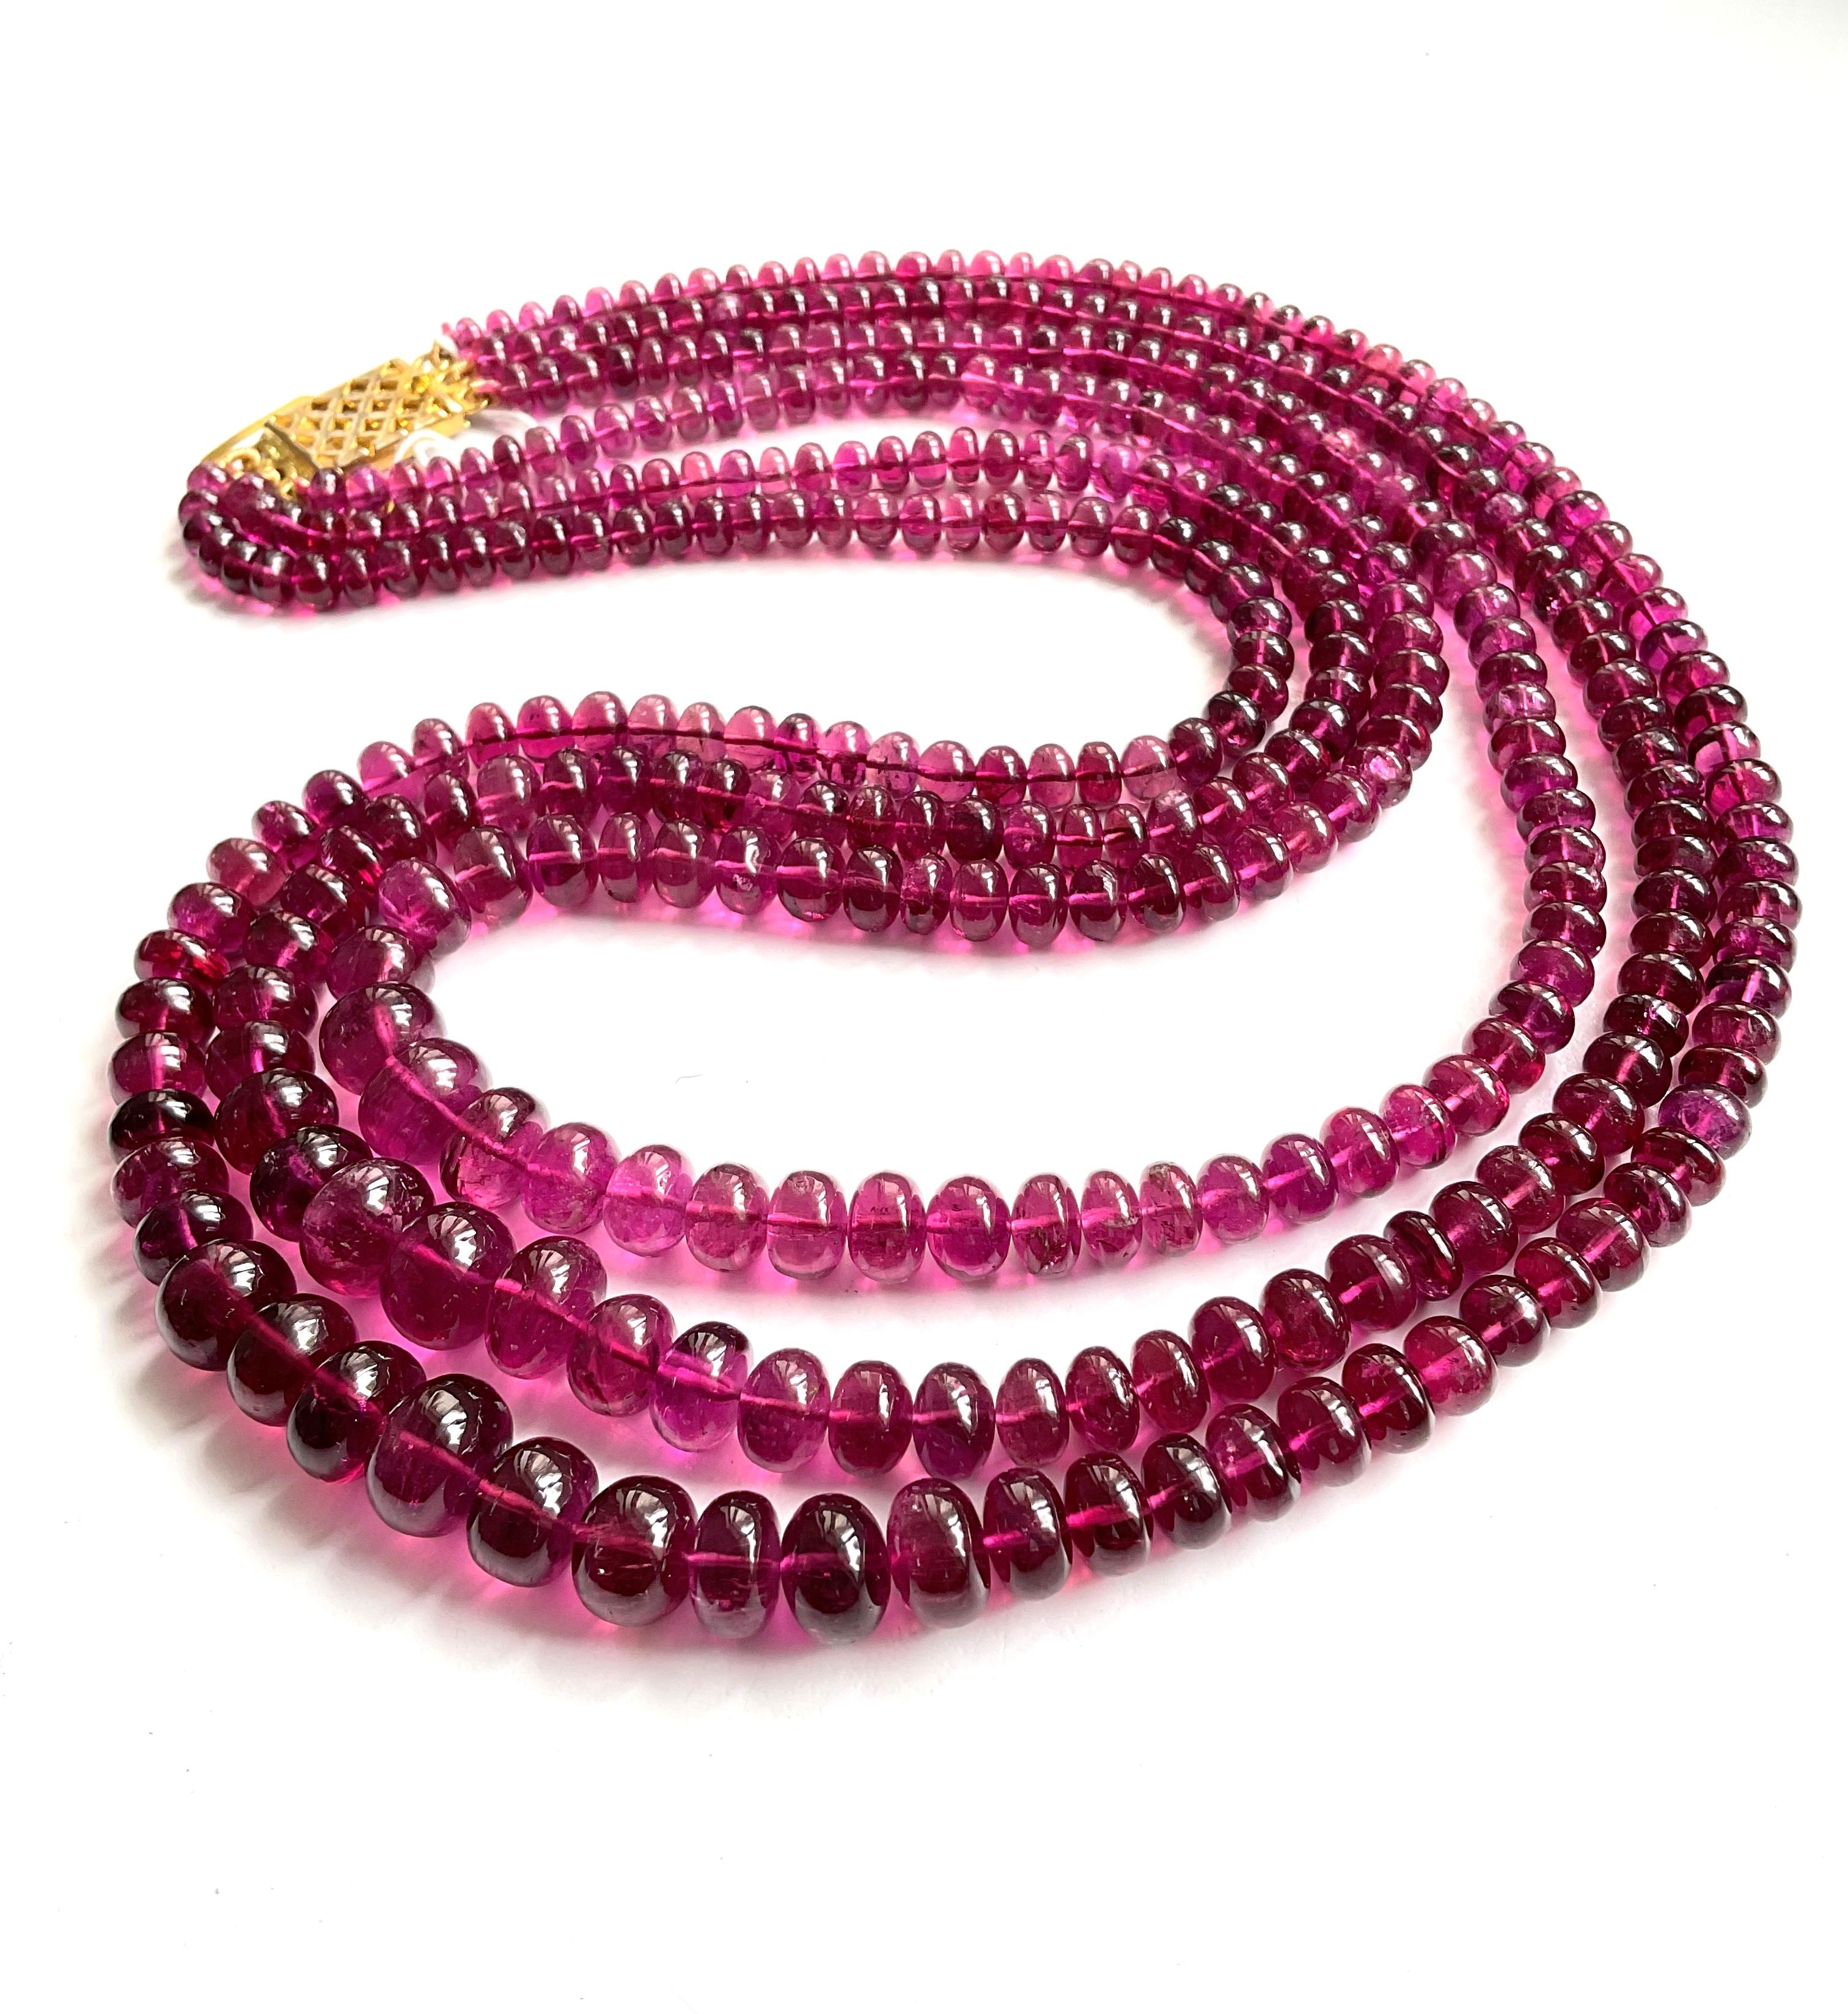 Women's or Men's 510.00 Carats Top Quality Rubellite Tourmaline Plain Beads Natural Gemstone For Sale